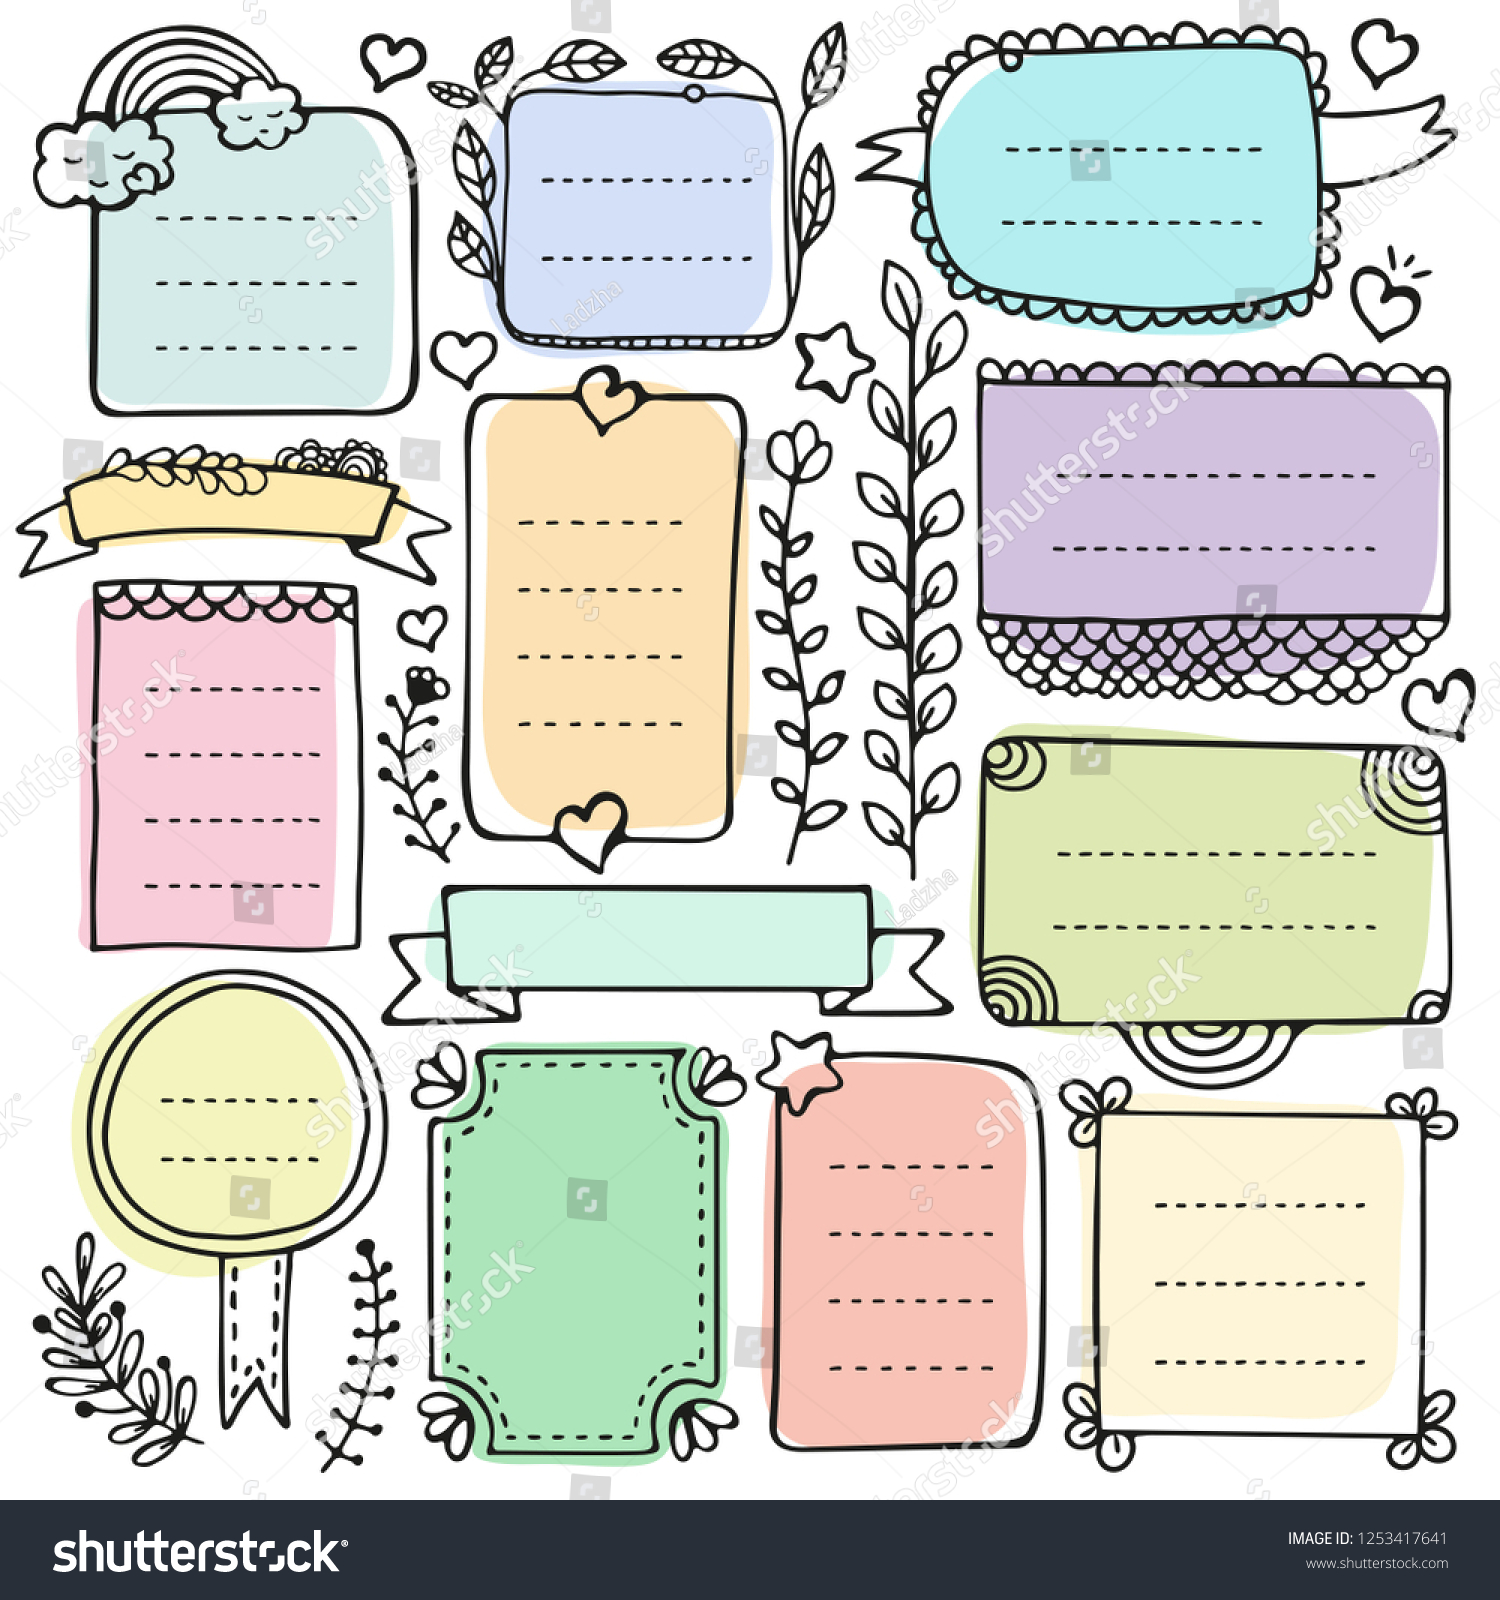 Bullet Journal Hand Drawn Vector Elements Stock Vector (Royalty Free ...